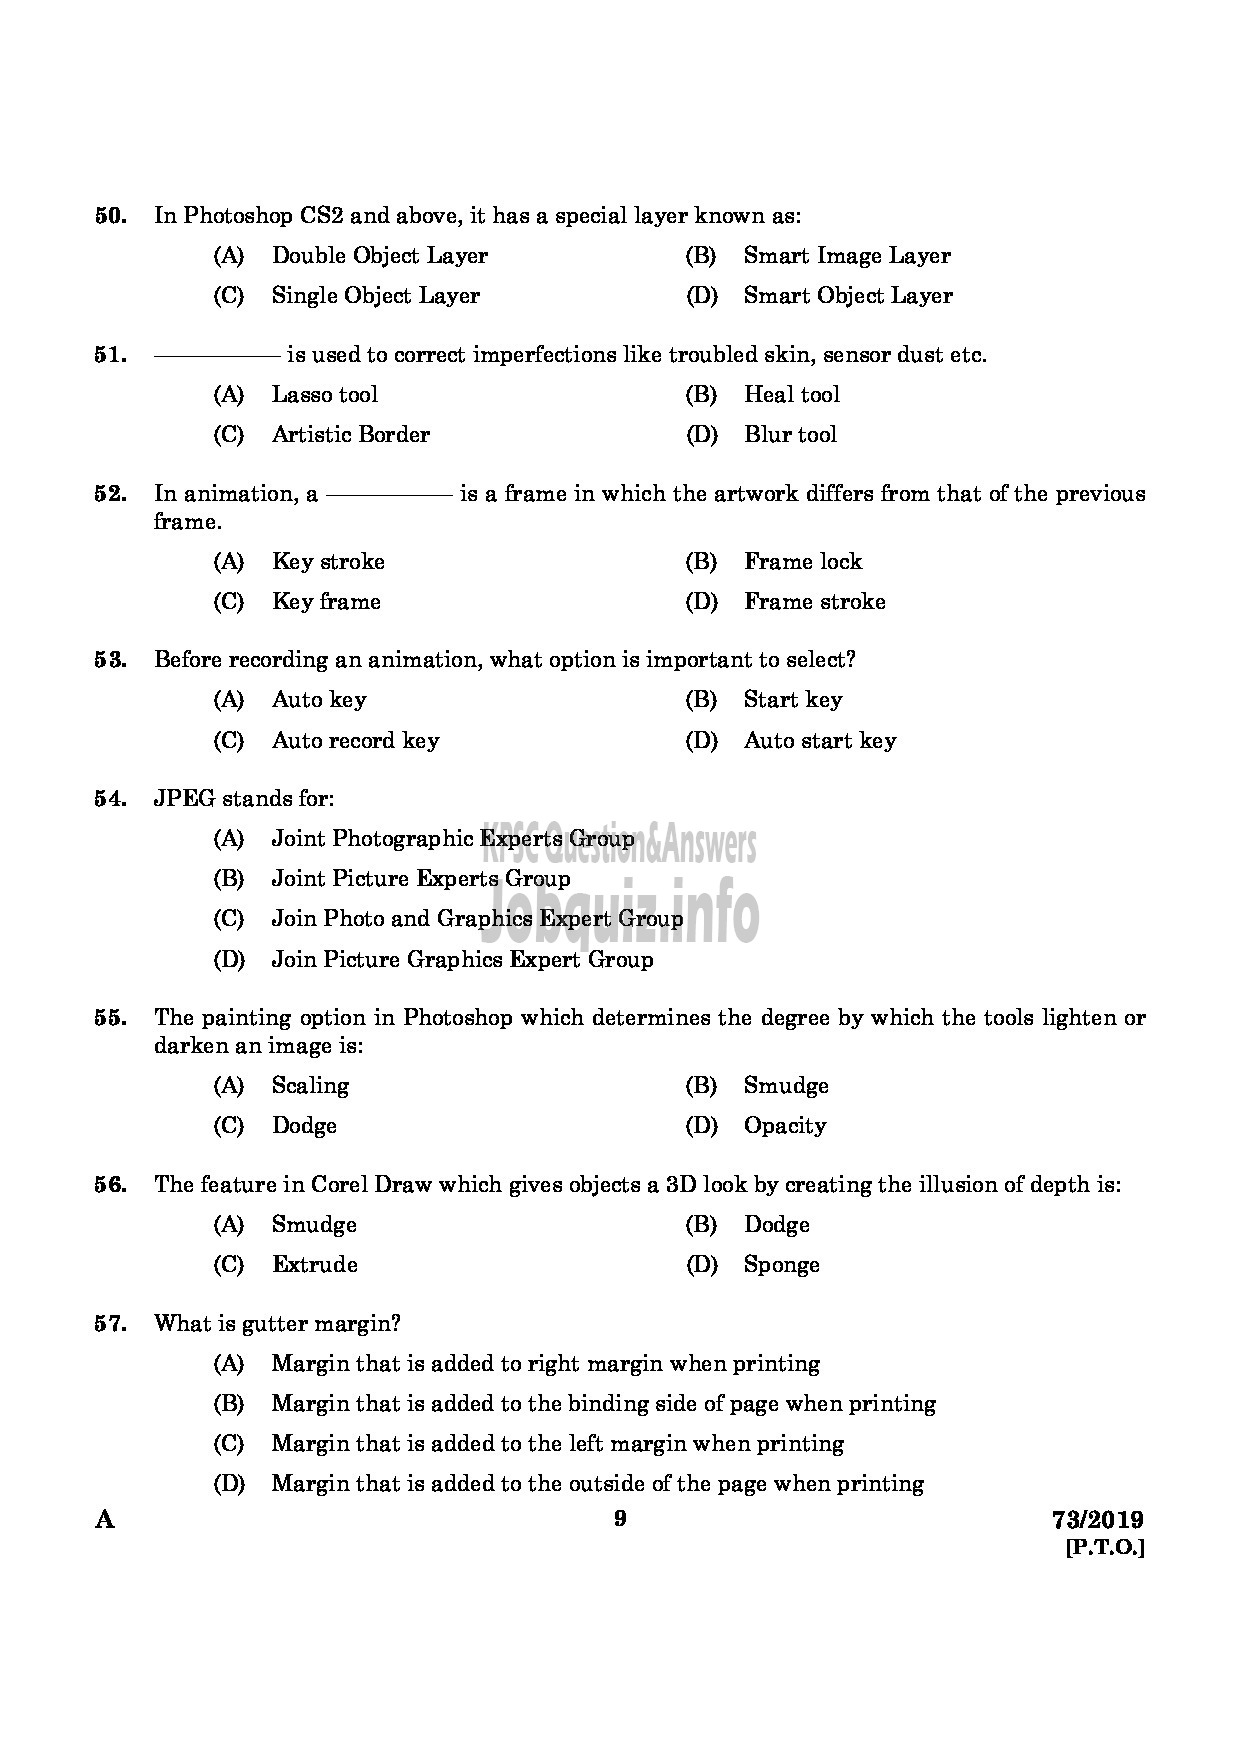 Kerala PSC Question Paper - Junior Instructor (Multimedia Animation And Special Effects) In Industrial Deve Dept English -7